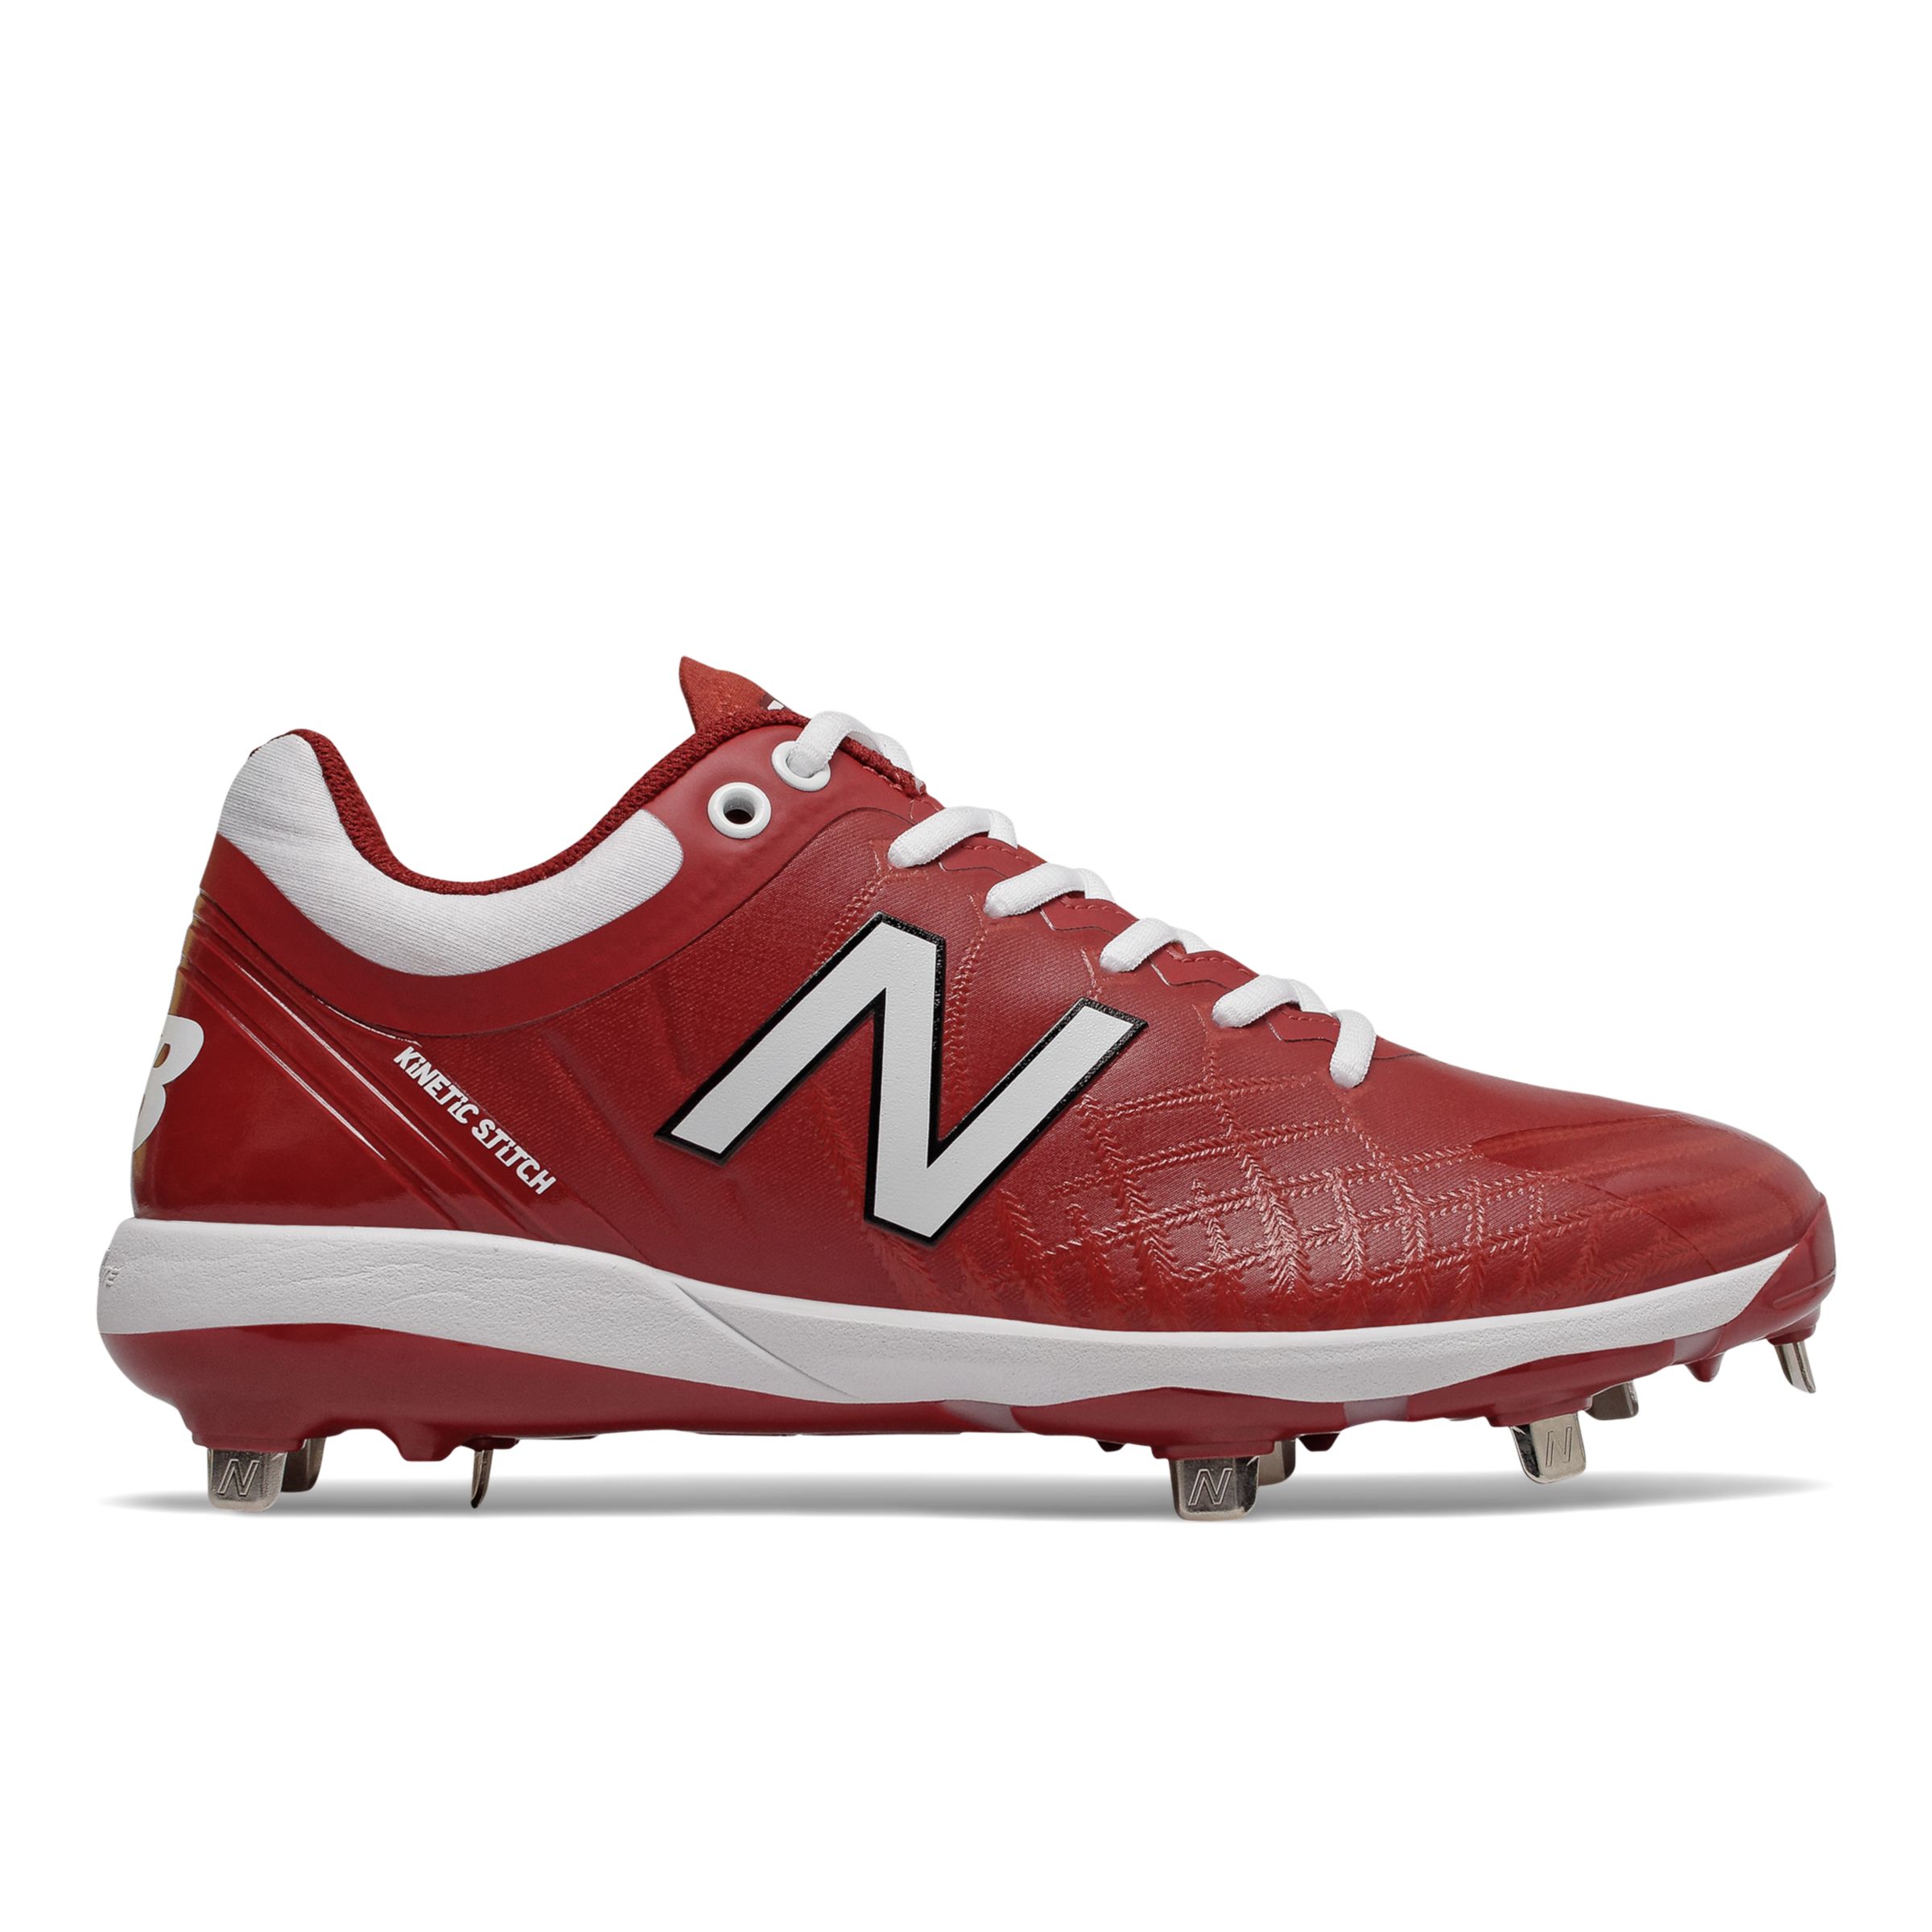 new balance baseball cleats red white and blue